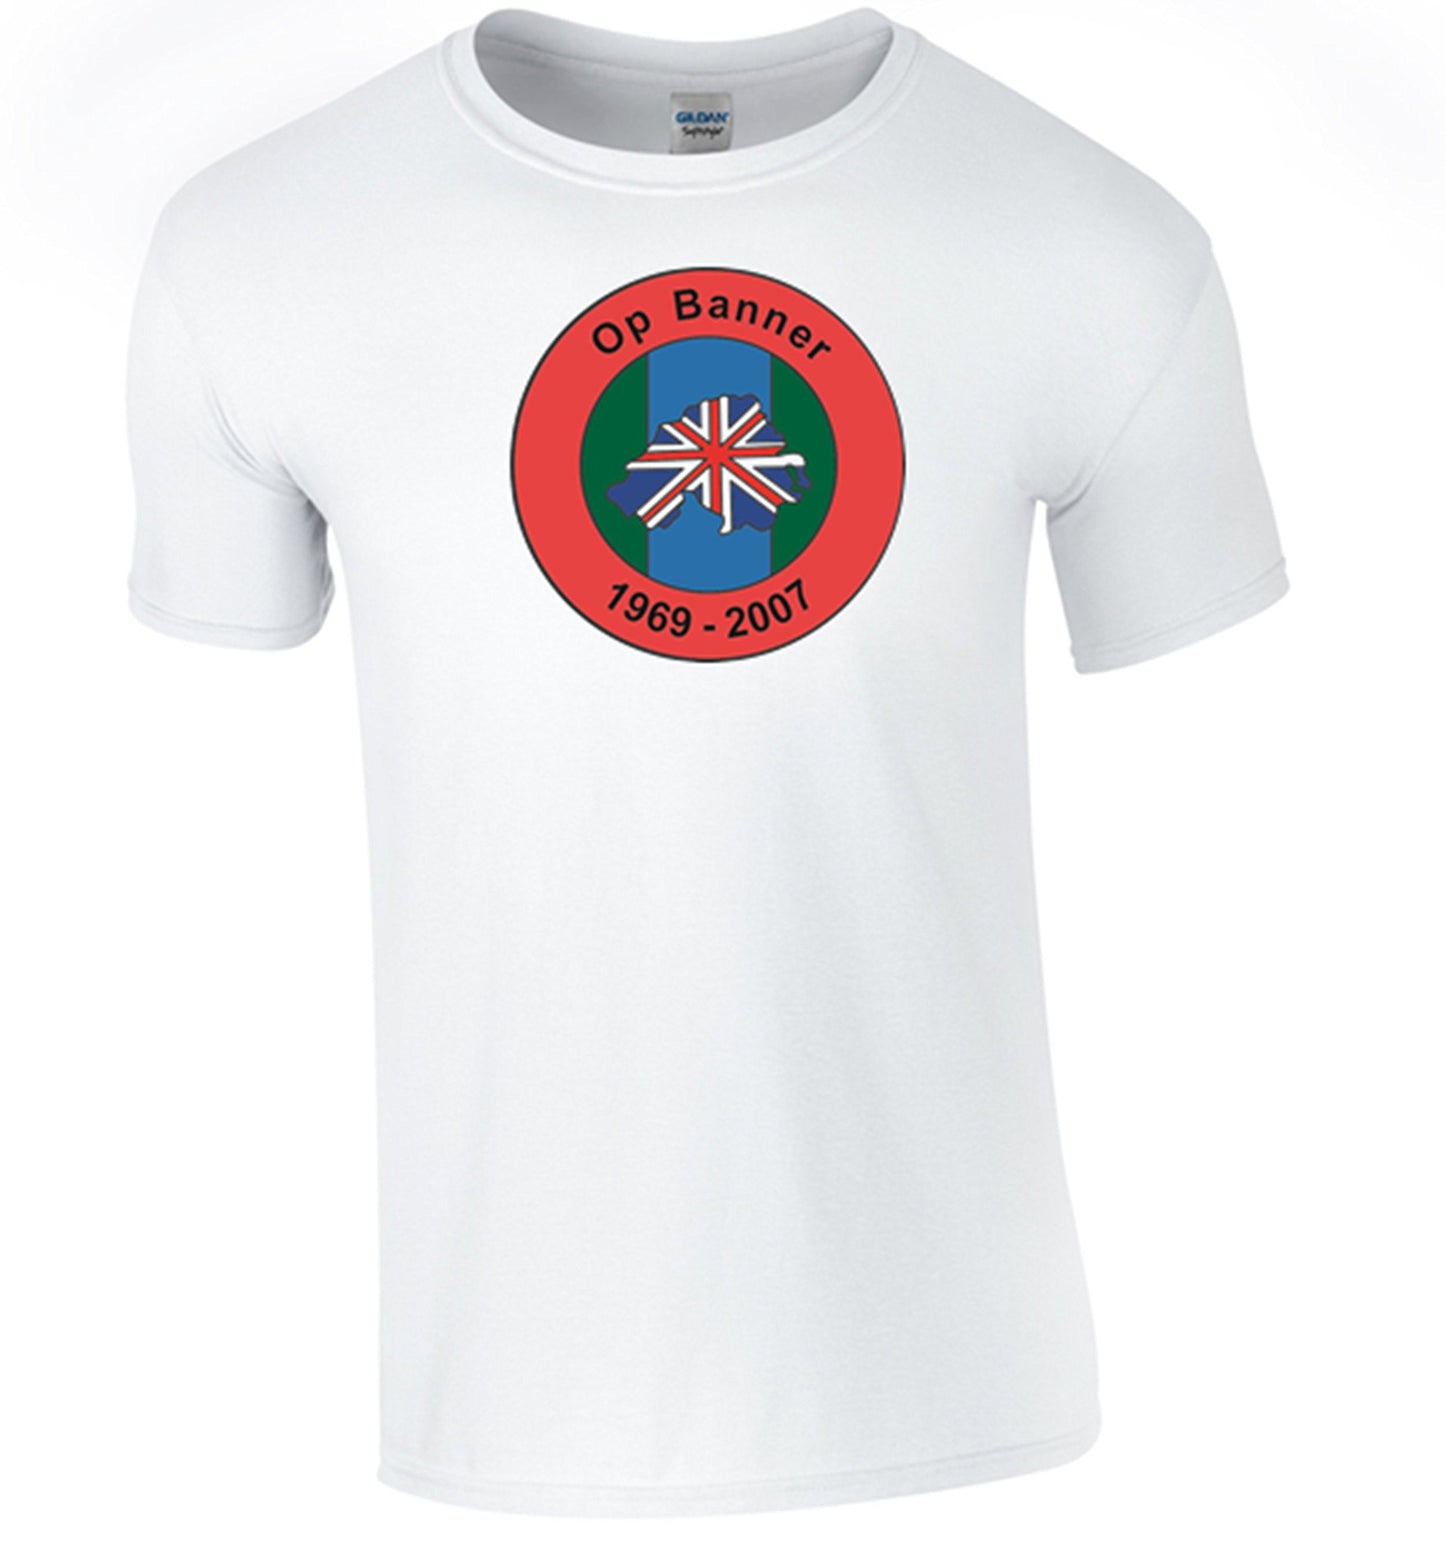 Bear Essentials Clothing. Northern Ireland Ops Banner T-Shirt (XL, White) - Army 1157 kit Army 1157 Kit